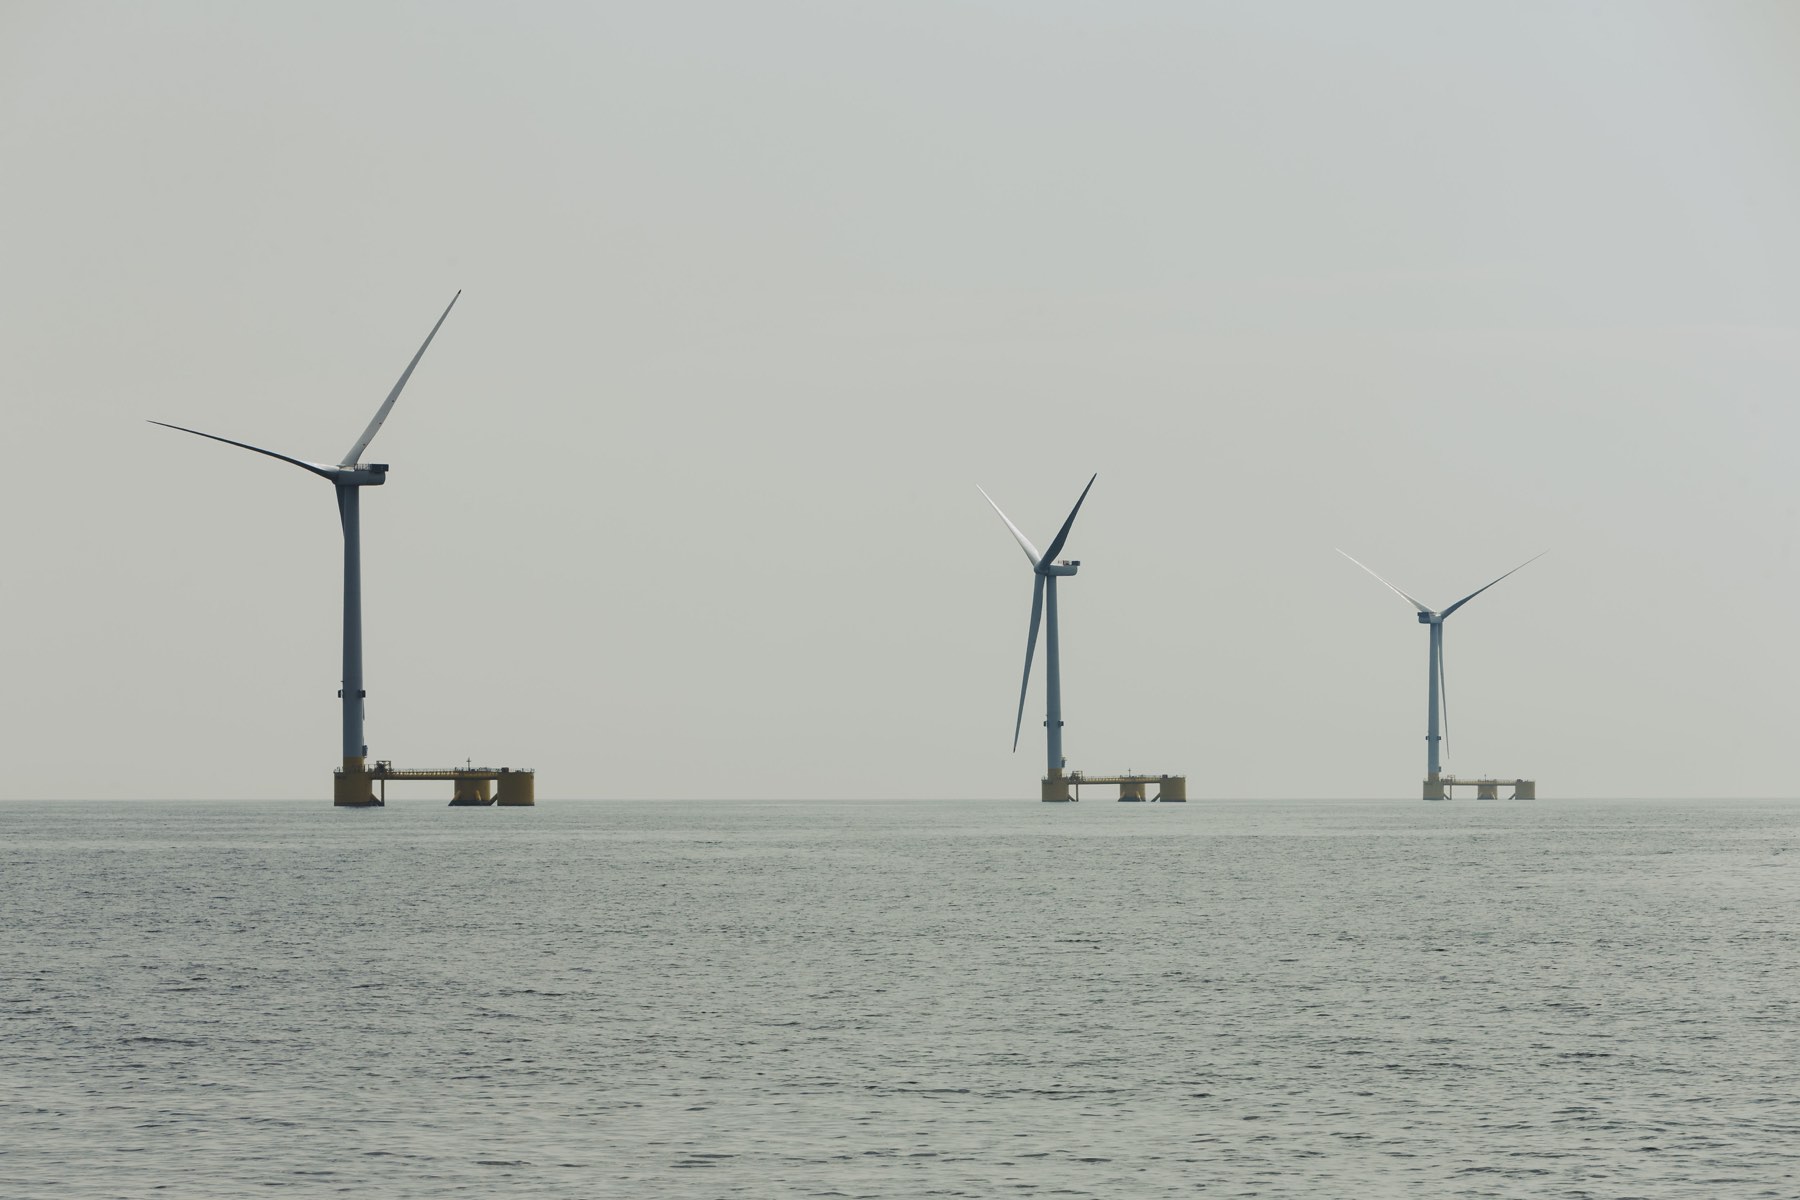 Flotation Energy and Vårgrønn announce offshore wind partnership to support oil and gas decarbonisation in Scotland